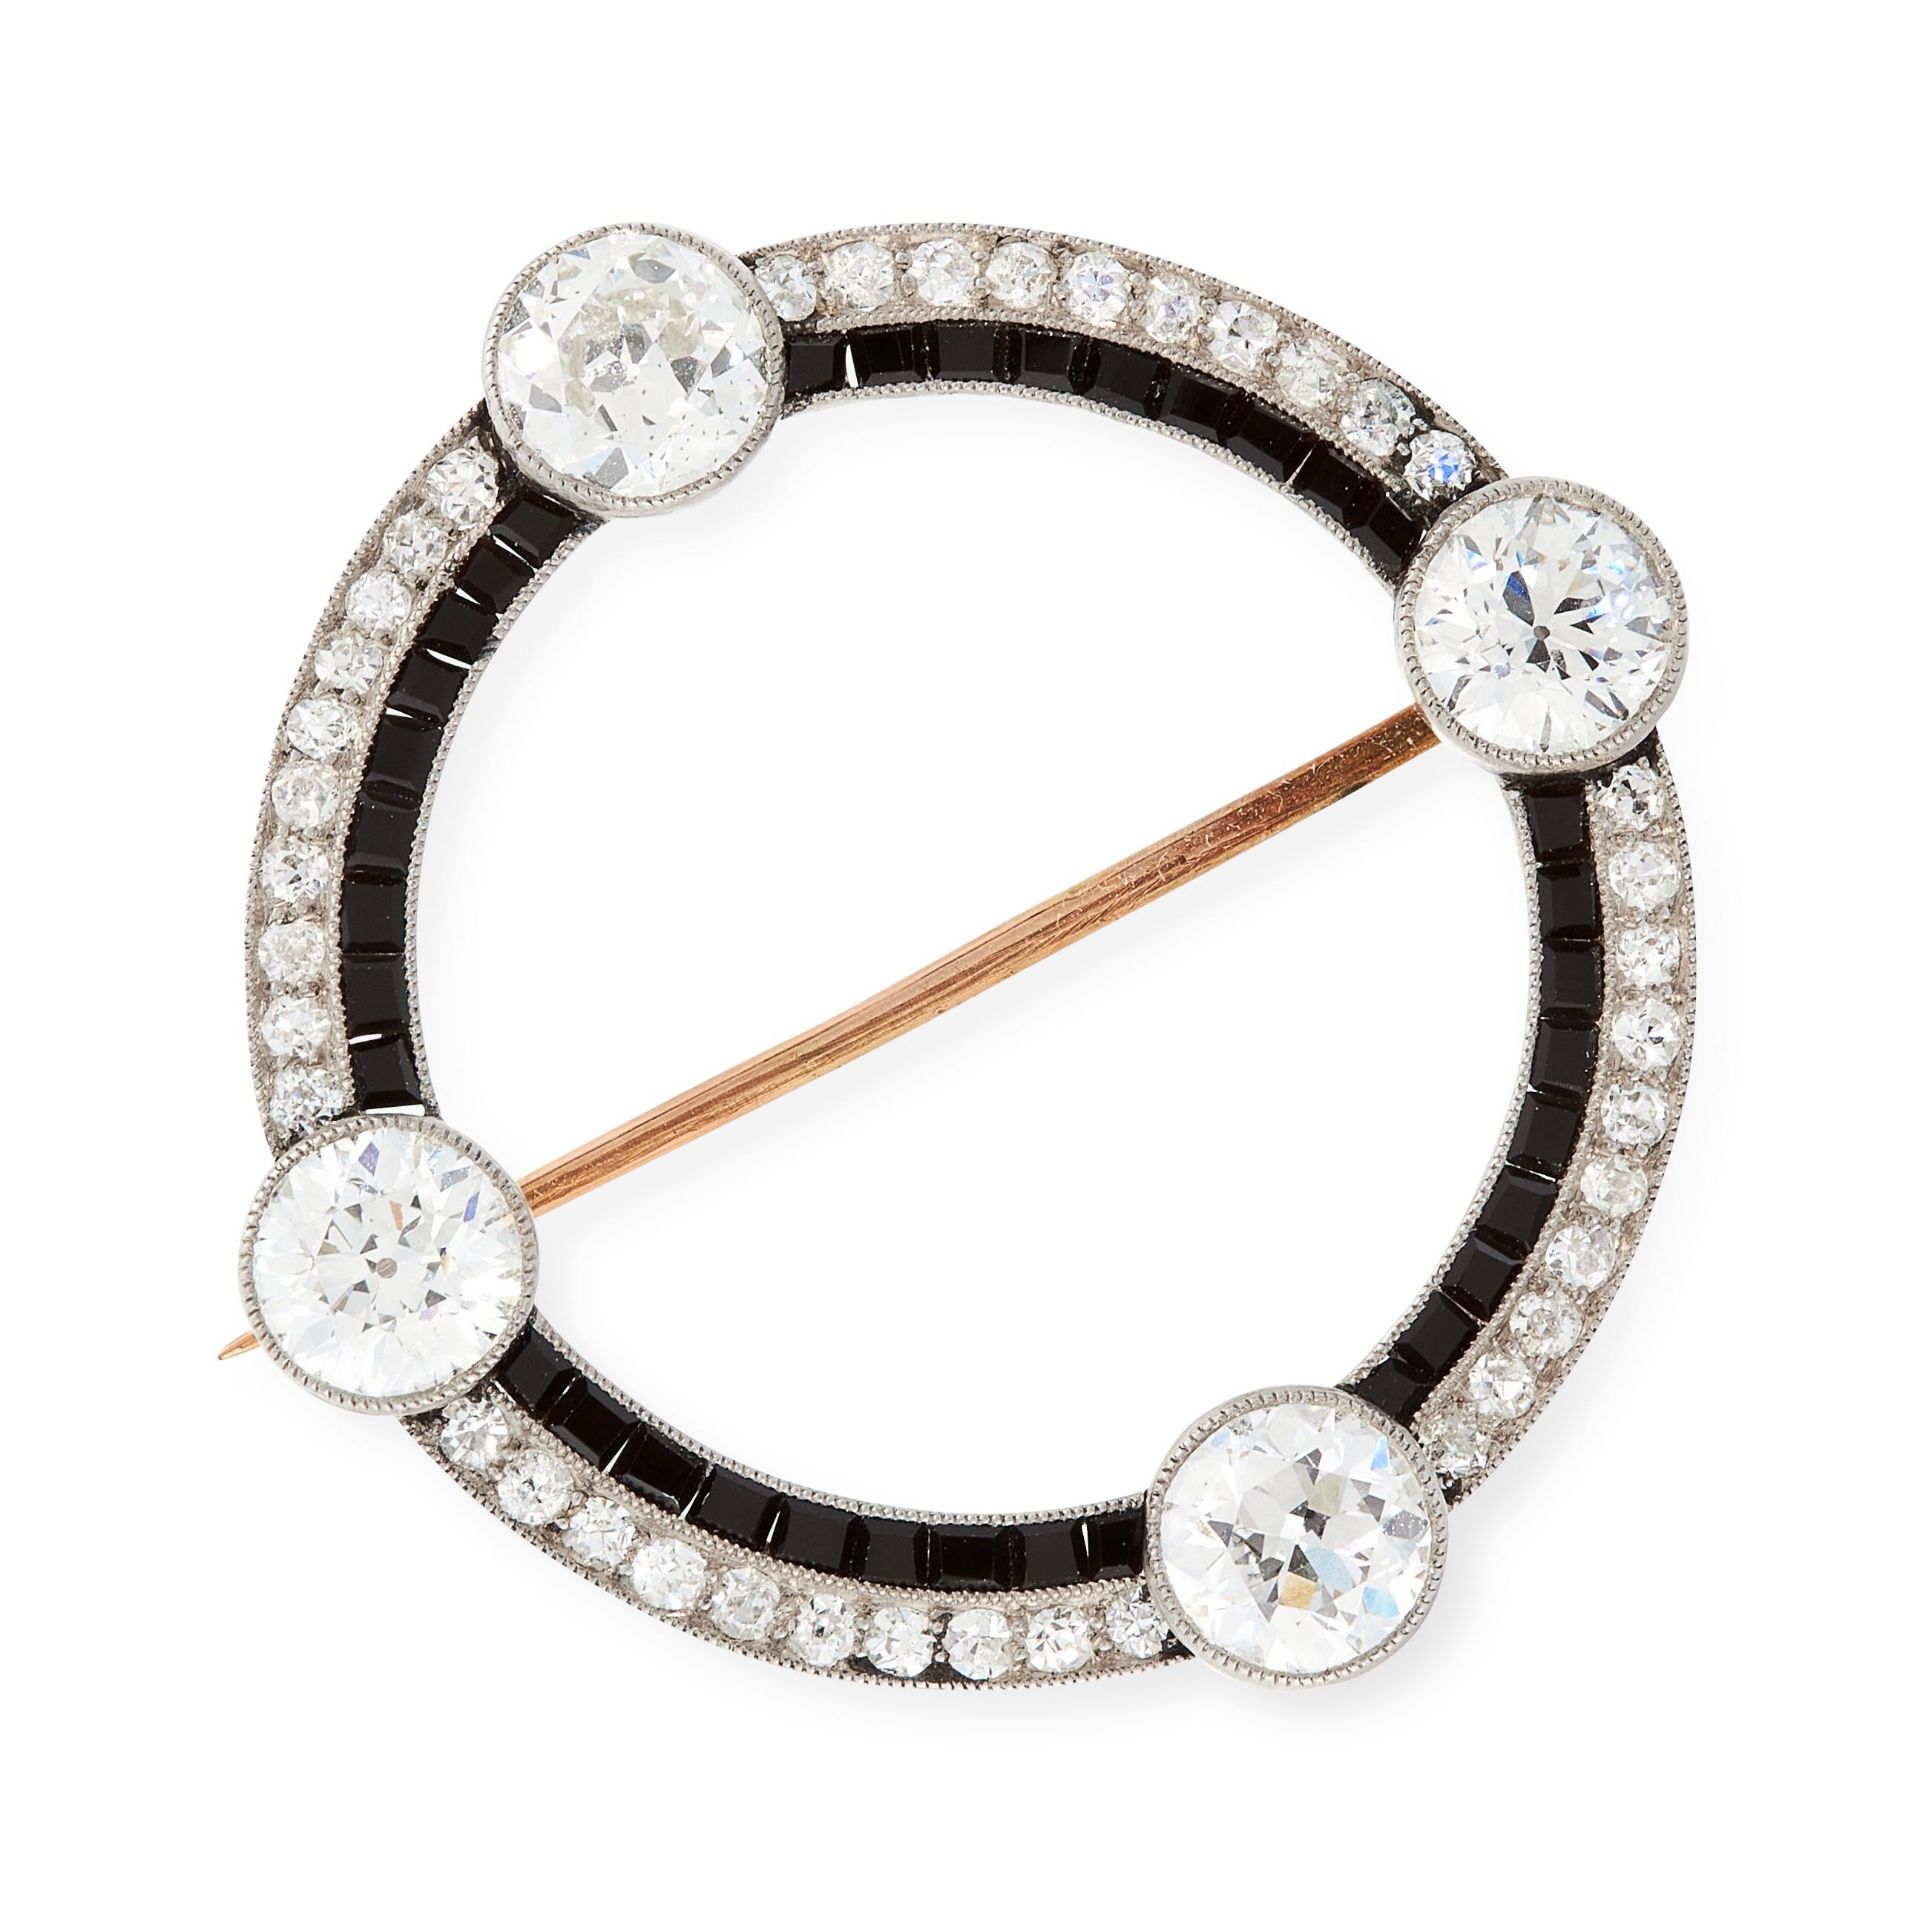 AN ART DECO DIAMOND AND ONYX BROOCH, EARLY 20TH CENTURY of circular design, set with four